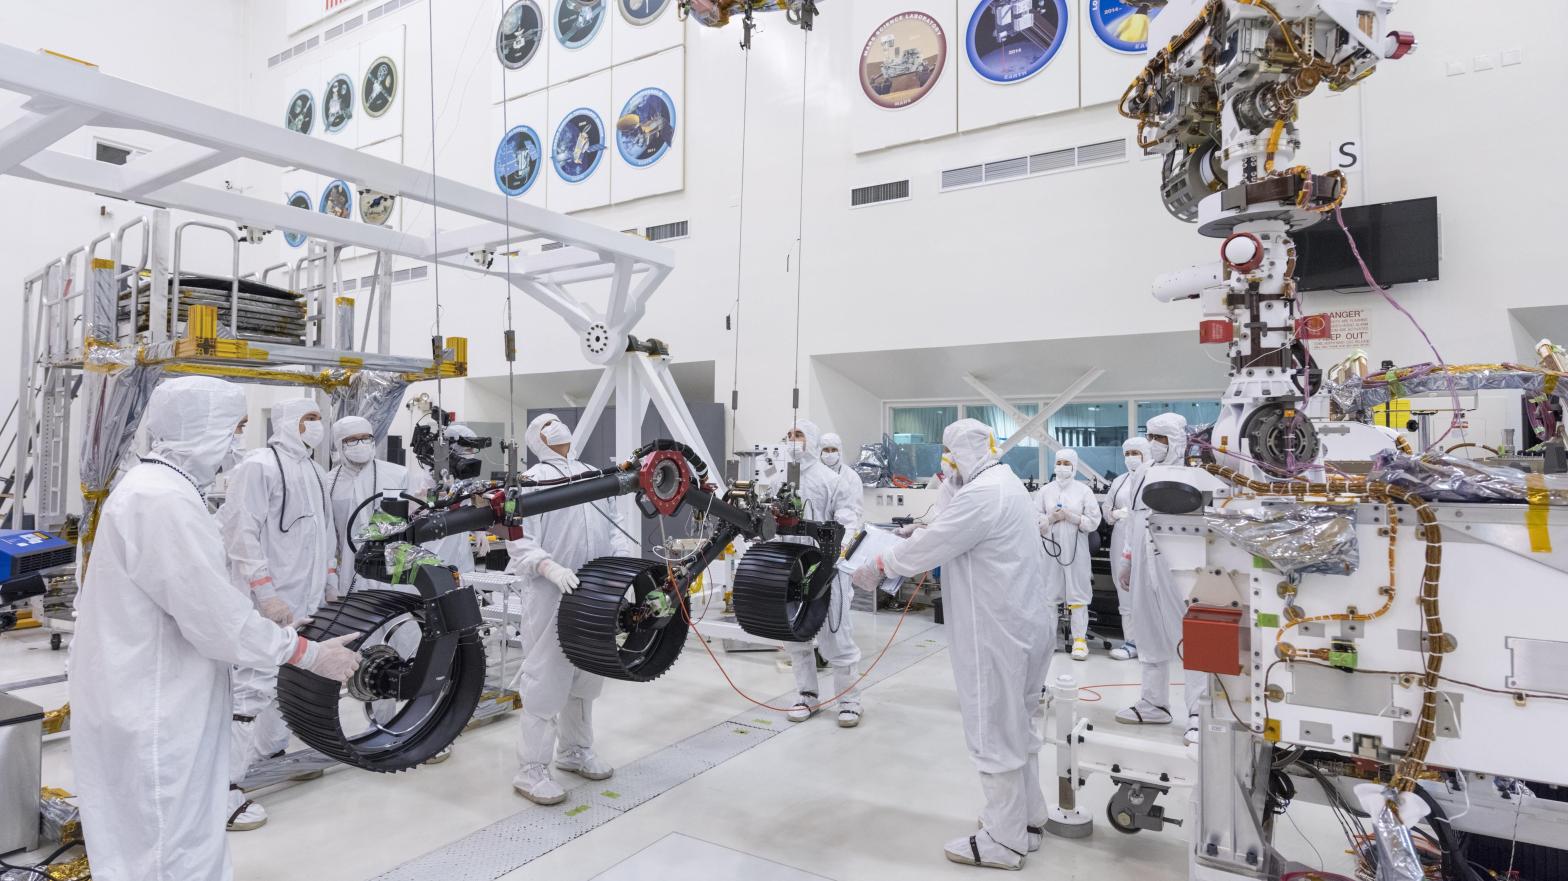 NASA's Perseverance rover being outfitted with its wheels at JPL on June 13, 2019. (Photo: NASA/JPL-Caltech)